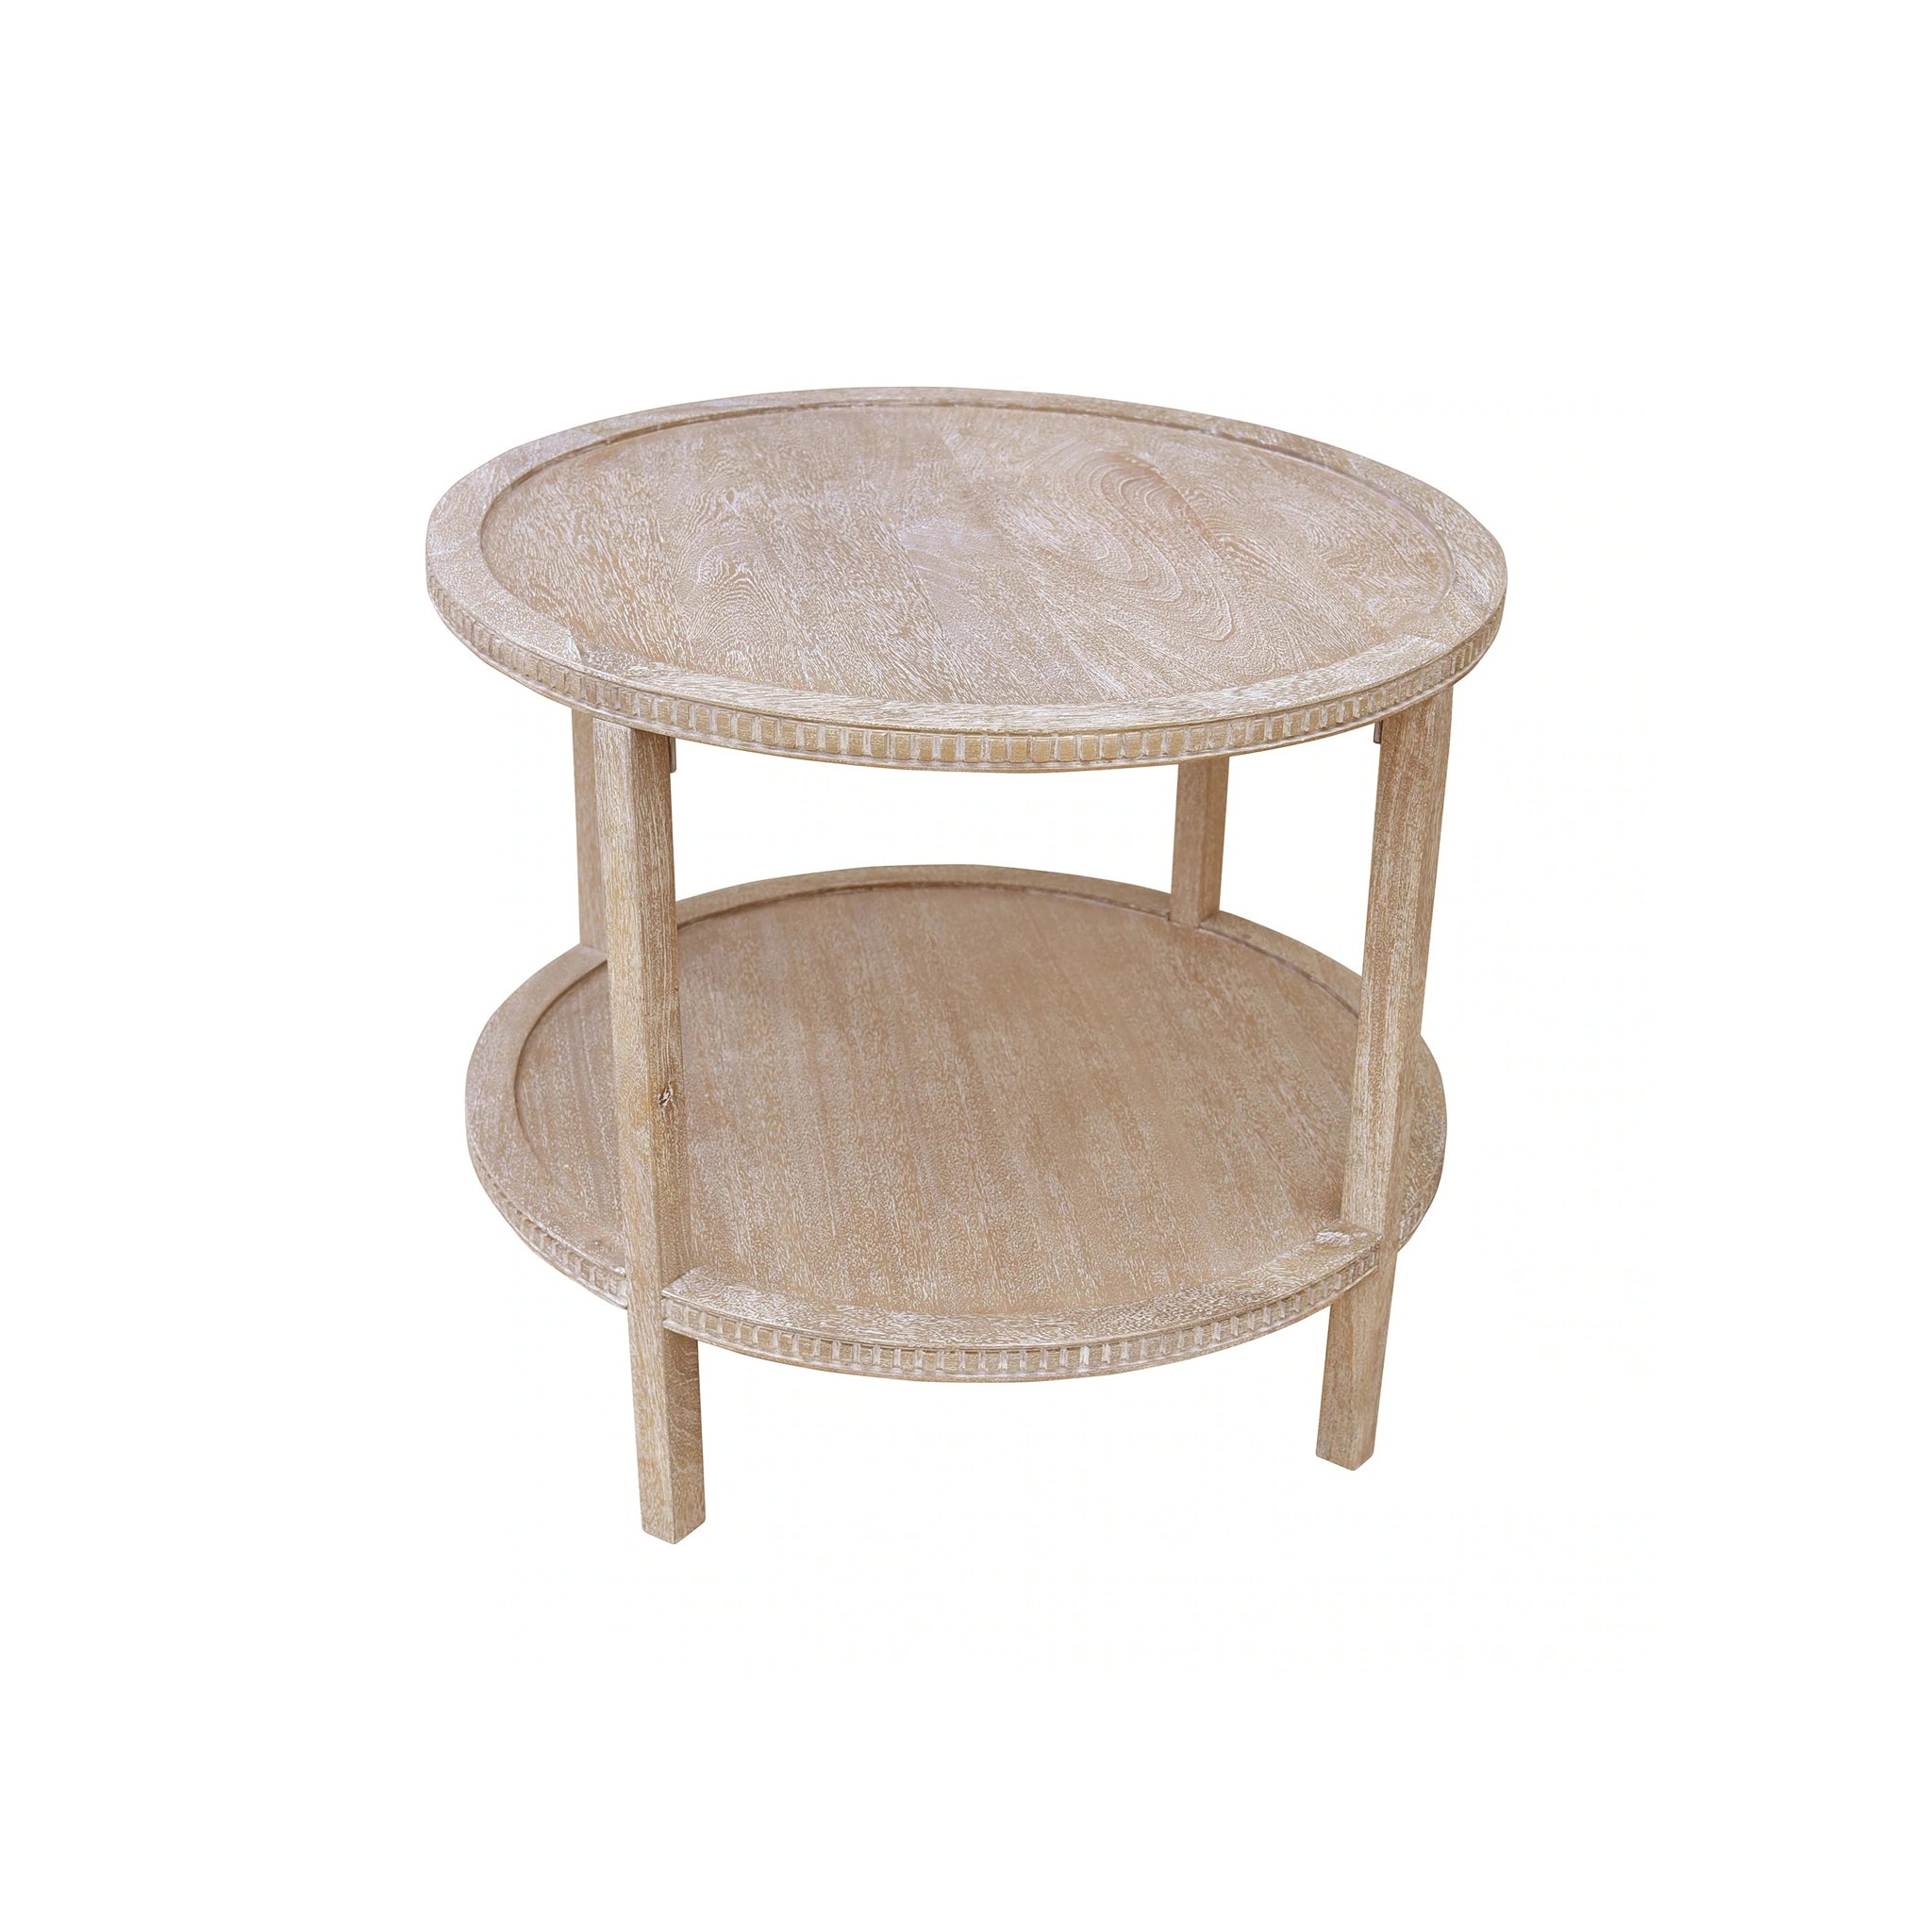 Alternate Top View Of Highland Side Table White Background